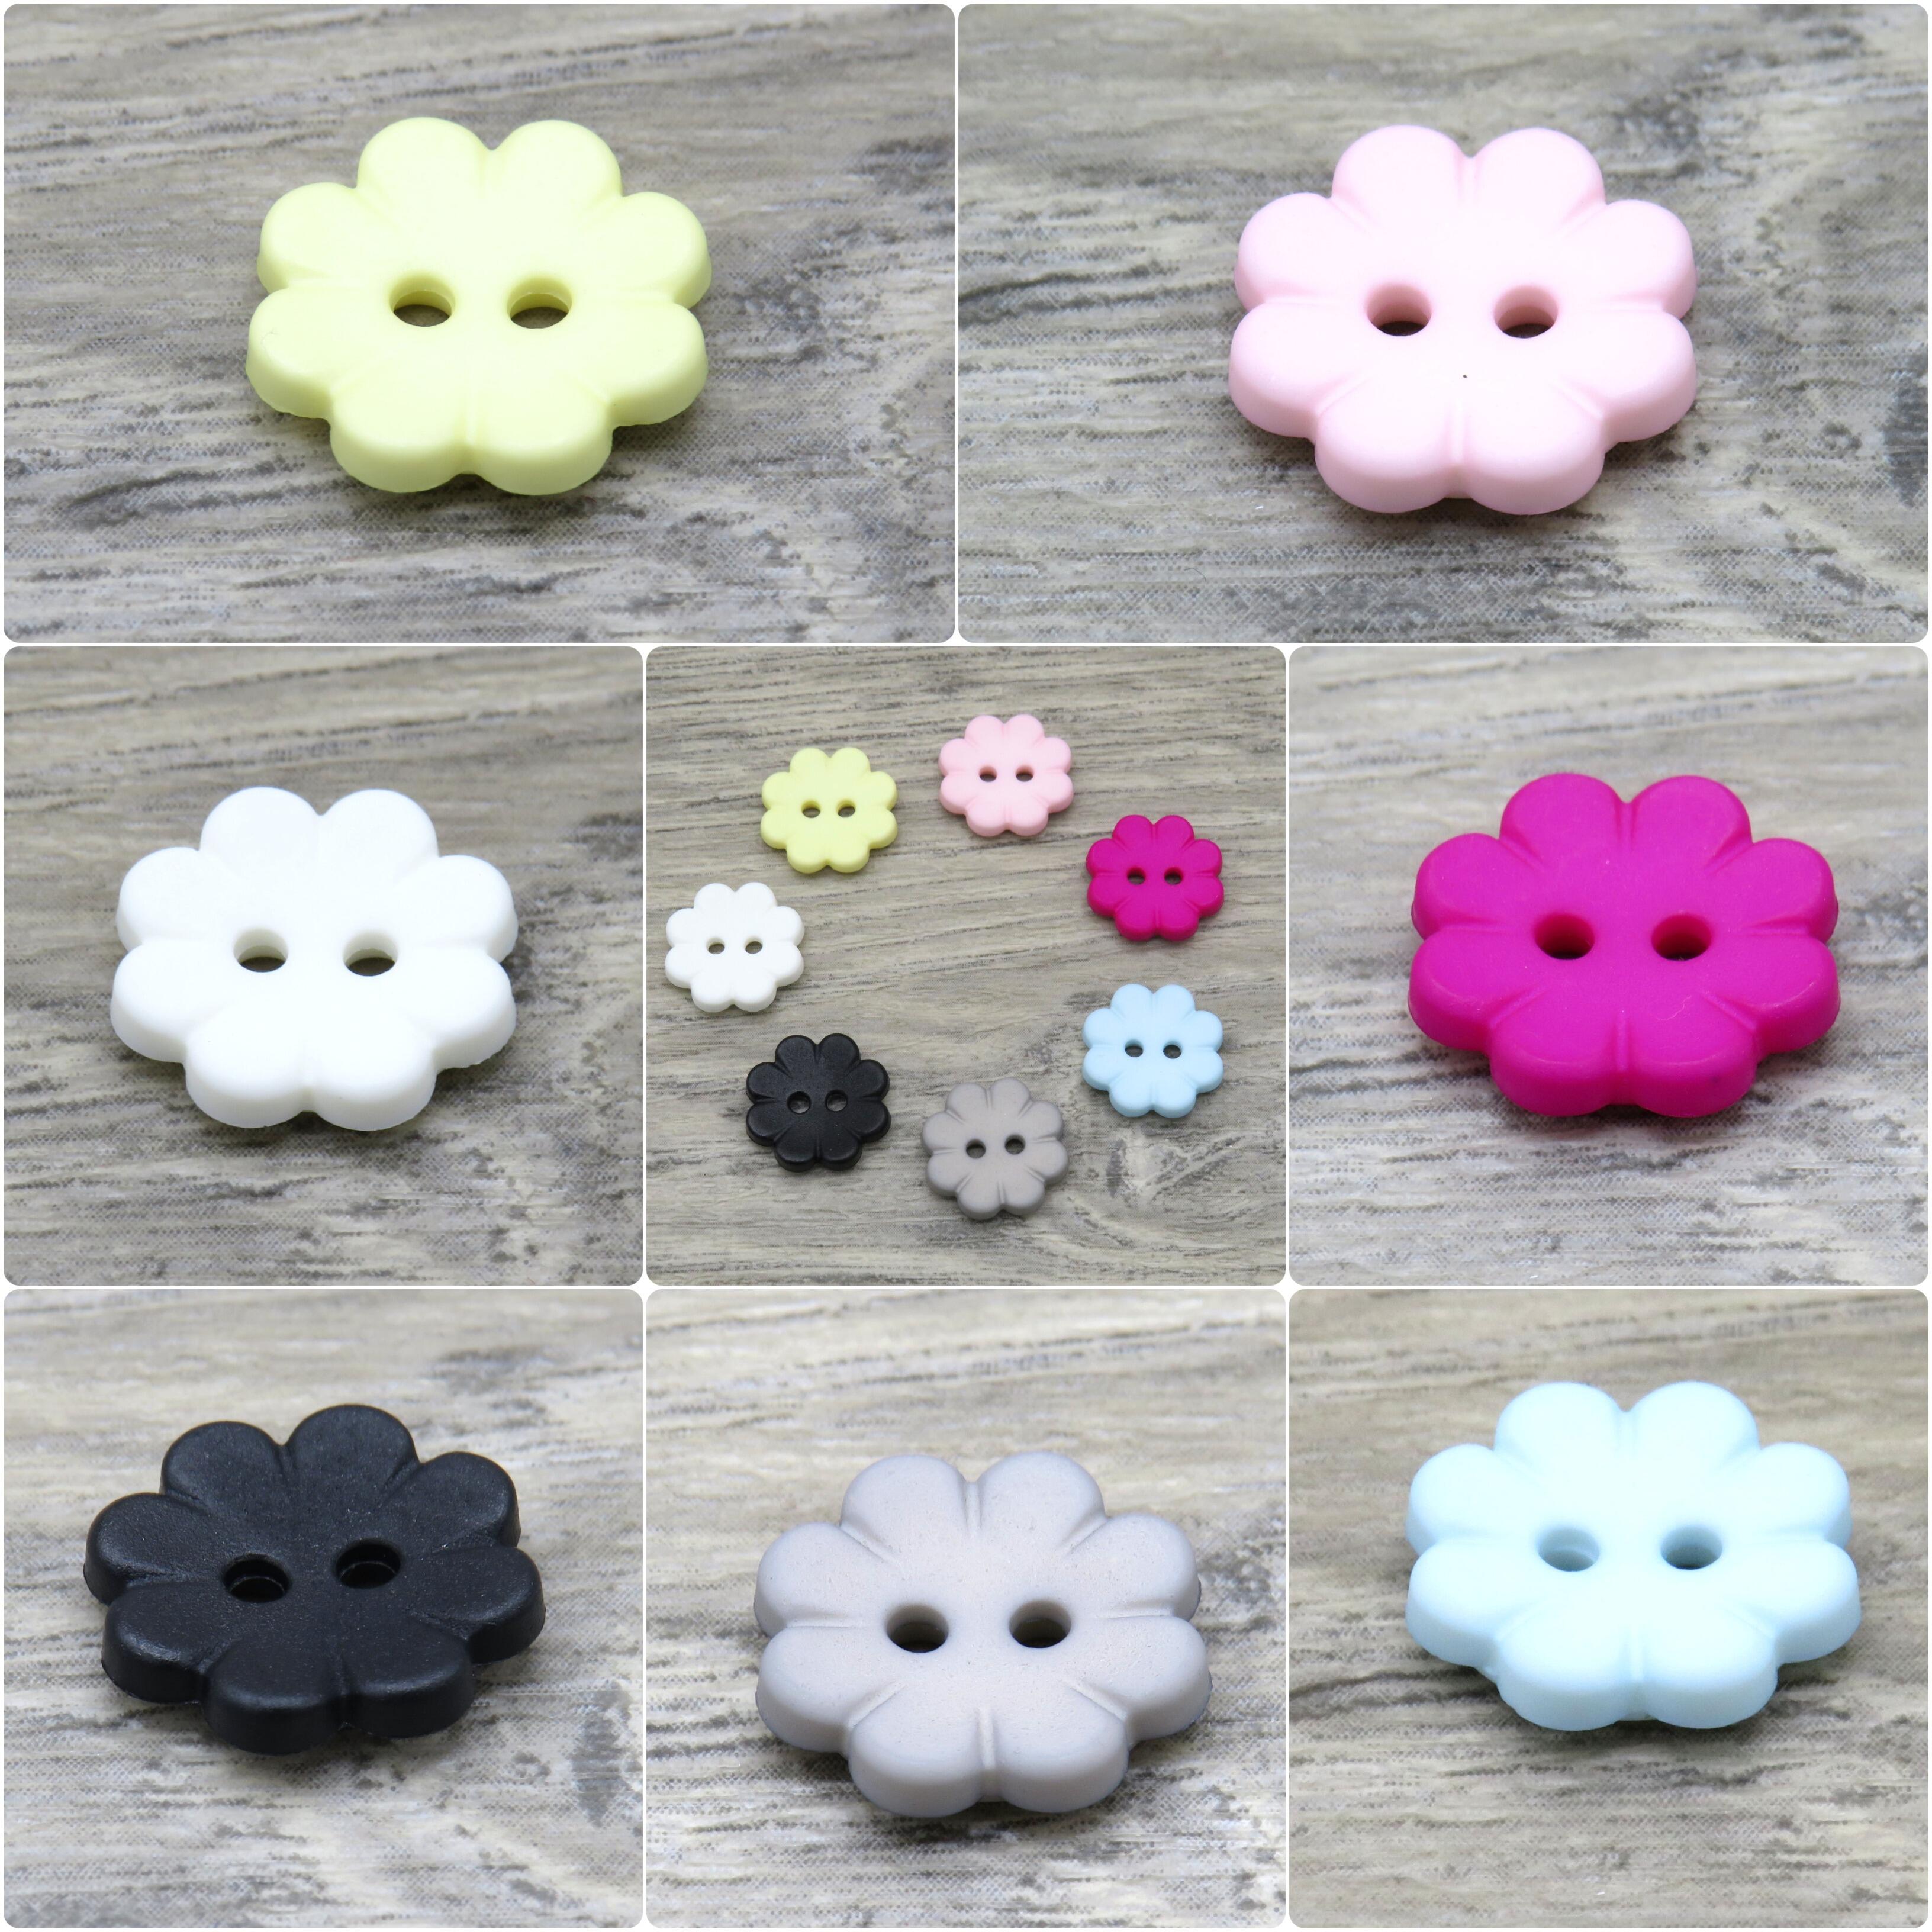 3/8 White Flower Buttons